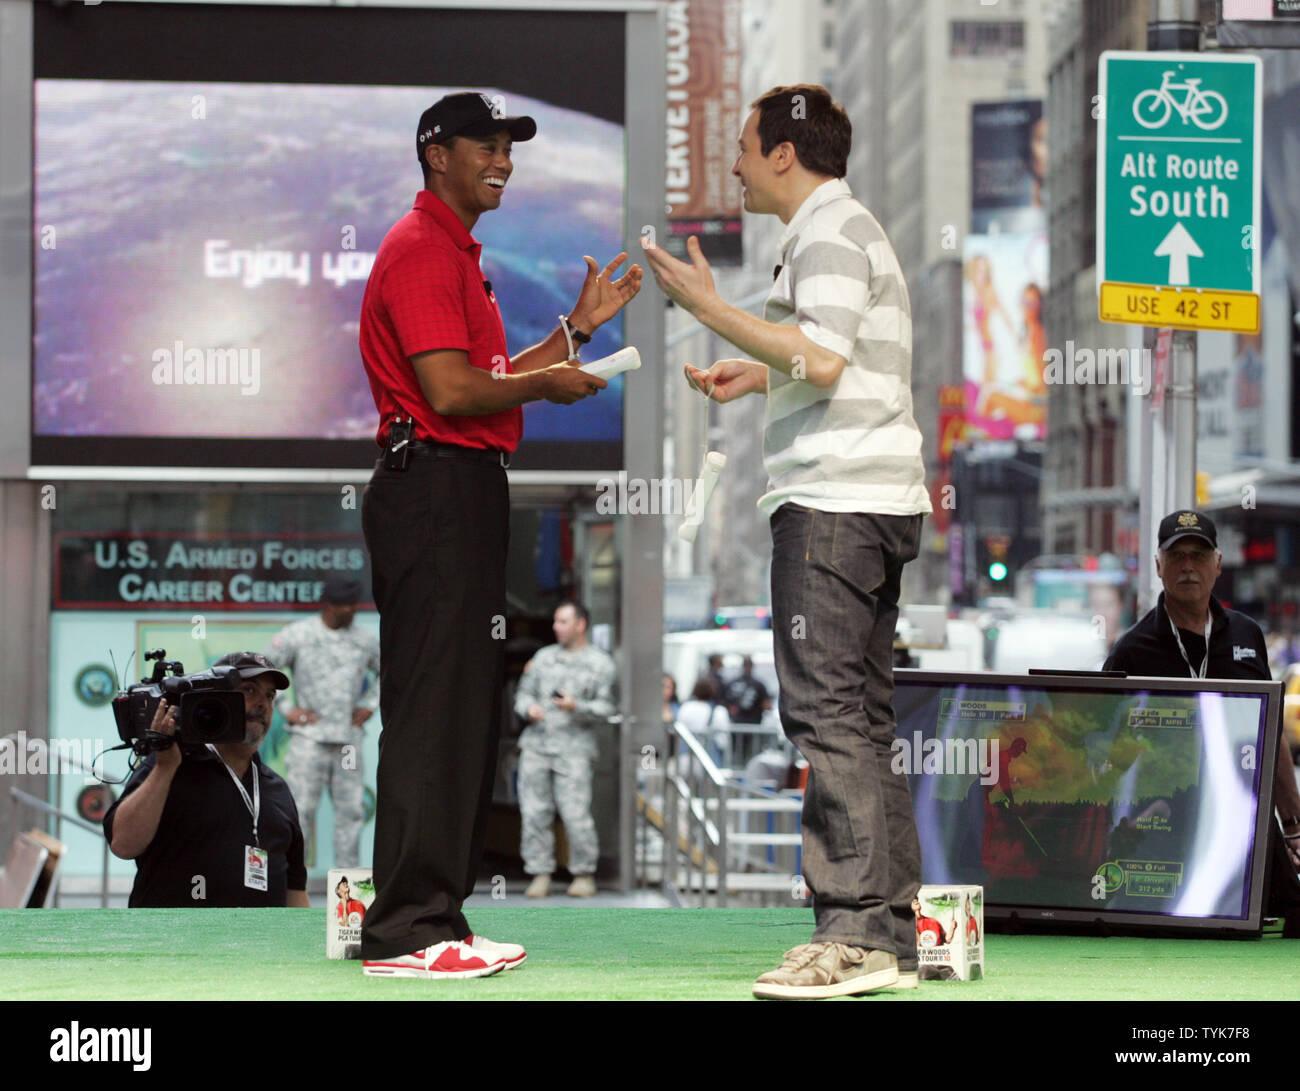 Tiger Woods challenges Jimmy Fallon to Tiger Woods PGA TOUR 10 Wii Golf  showdown in Times Square in New York on June 25, 2009. Jimmy Fallon won the  challenge. (UPI Photo/Laura Cavanaugh